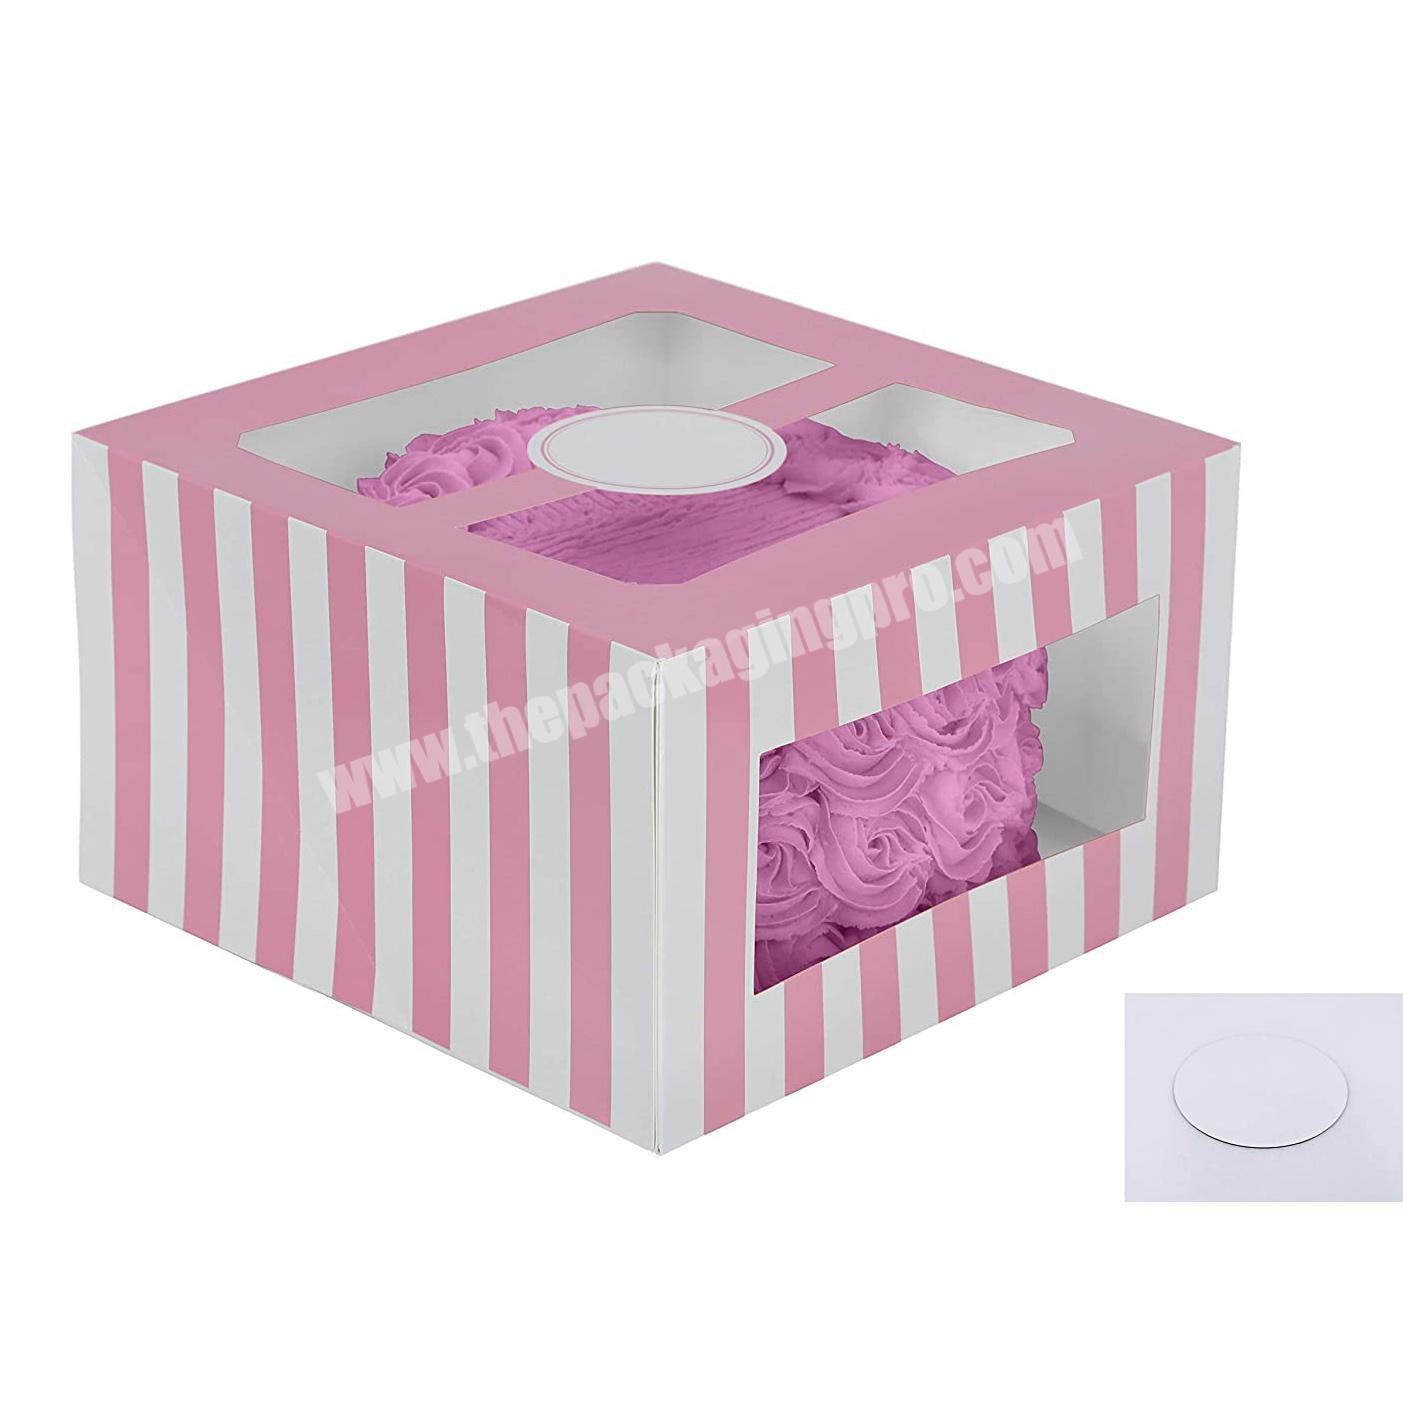 Cardboard Cake Boxes 10 x 10 x 6 Inch Tall  wholesale white bakery packaging clear paper cake boxes Set in bulk with Cake Board